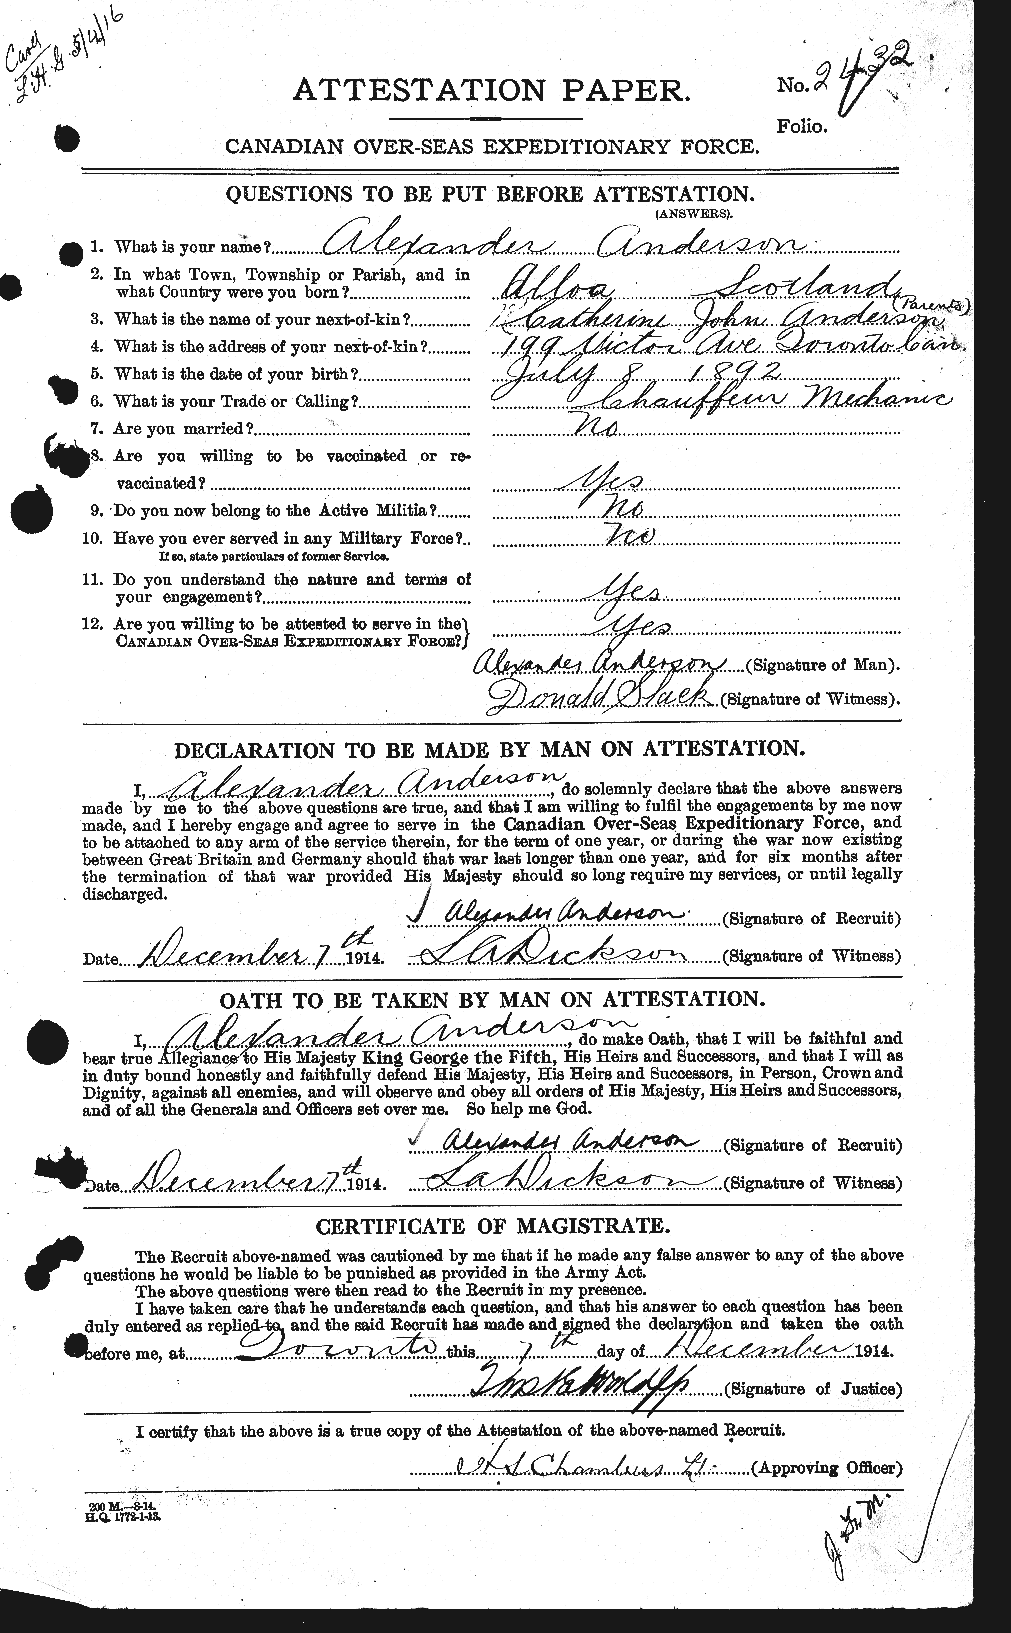 Personnel Records of the First World War - CEF 209507a